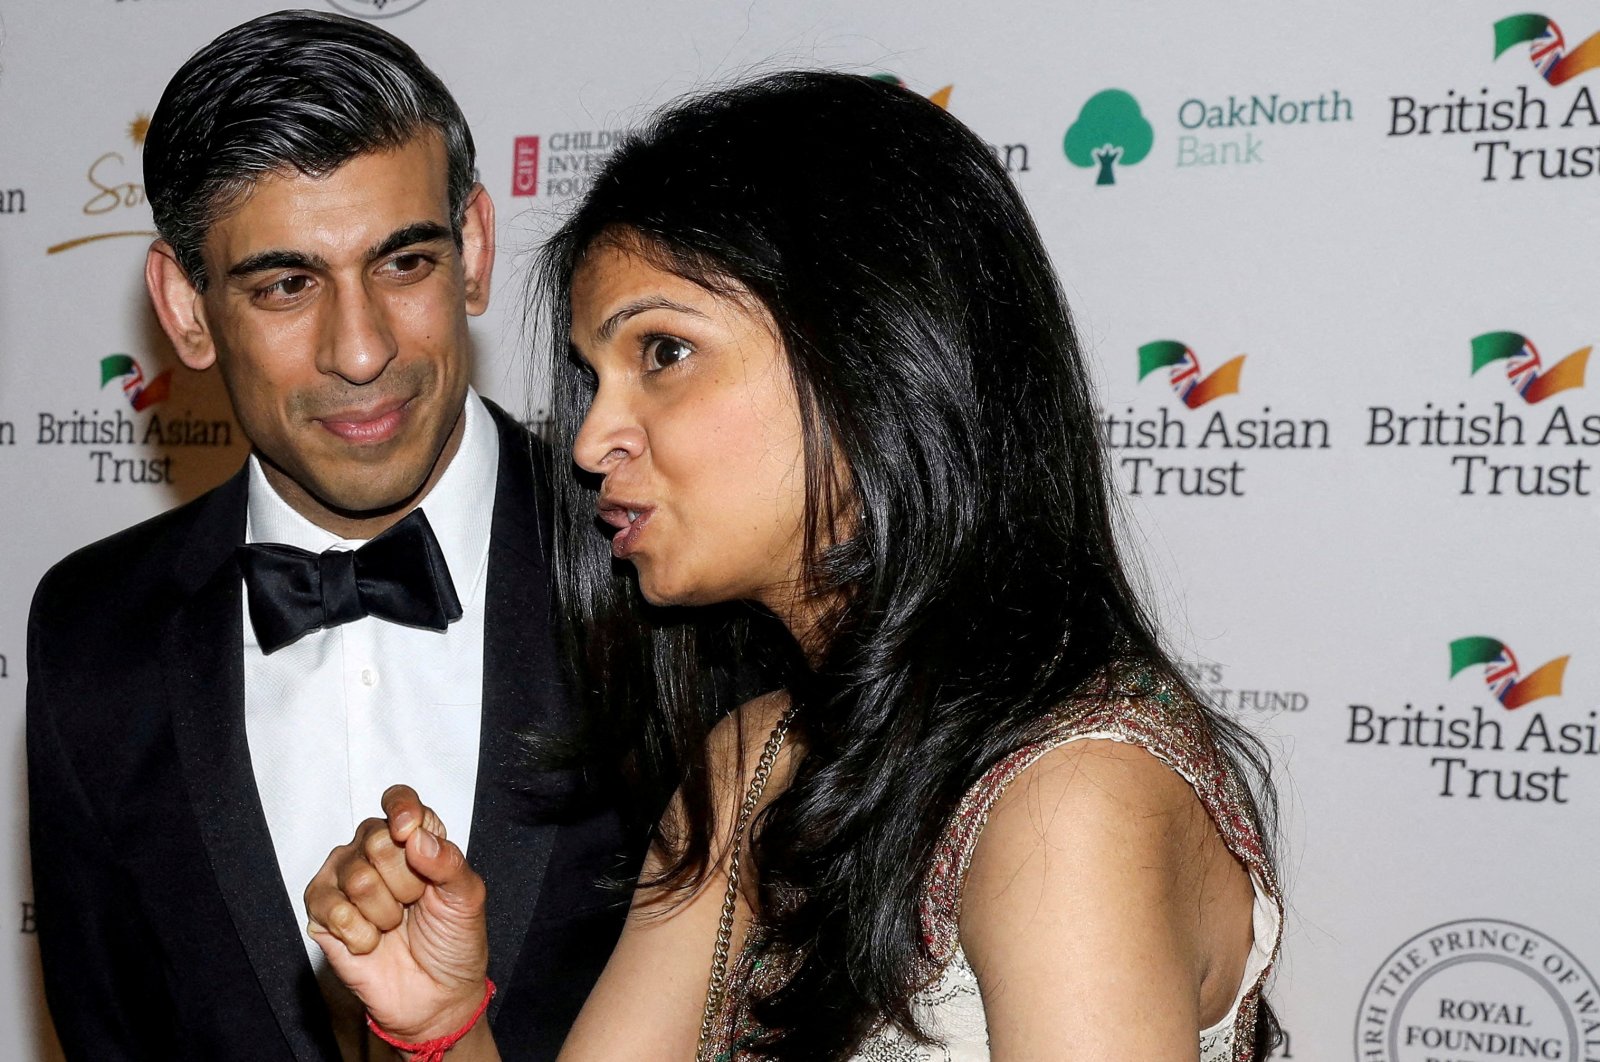 British Chancellor of the Exchequer Rishi Sunak and his wife Akshata Murthy attend a reception to celebrate the British Asian Trust, at The British Museum, in London, Britain, Feb. 9, 2022. (Reuters Photo)